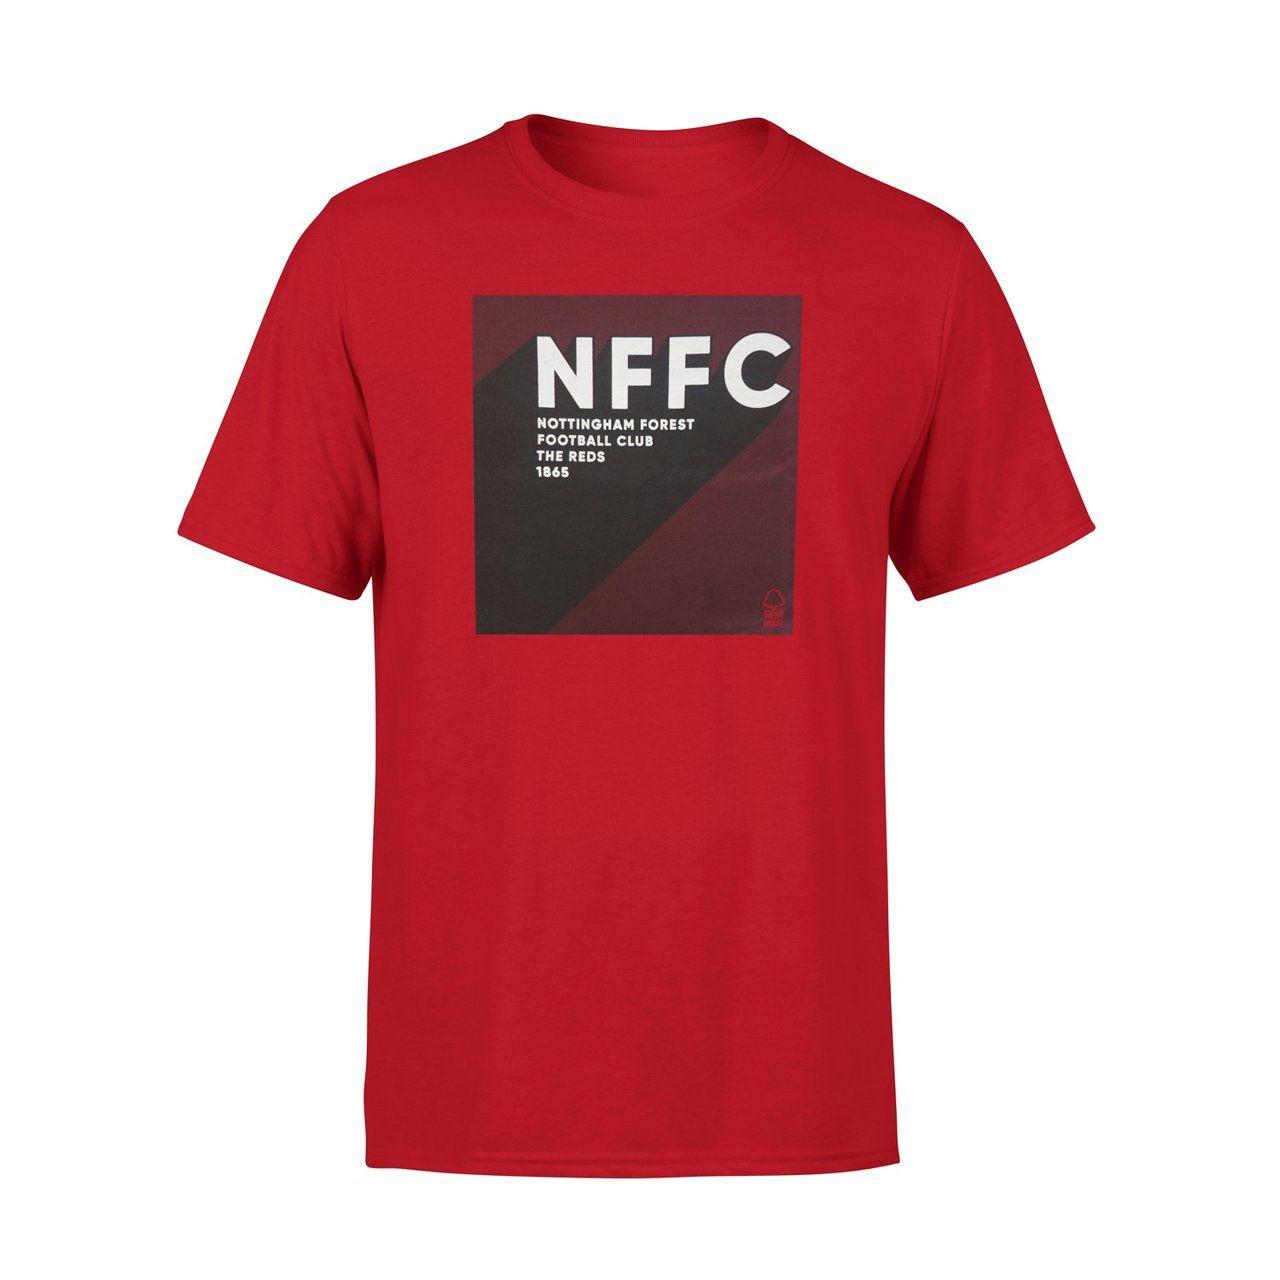 S a Red Square Logo - NFFC Junior Red Square T Shirt